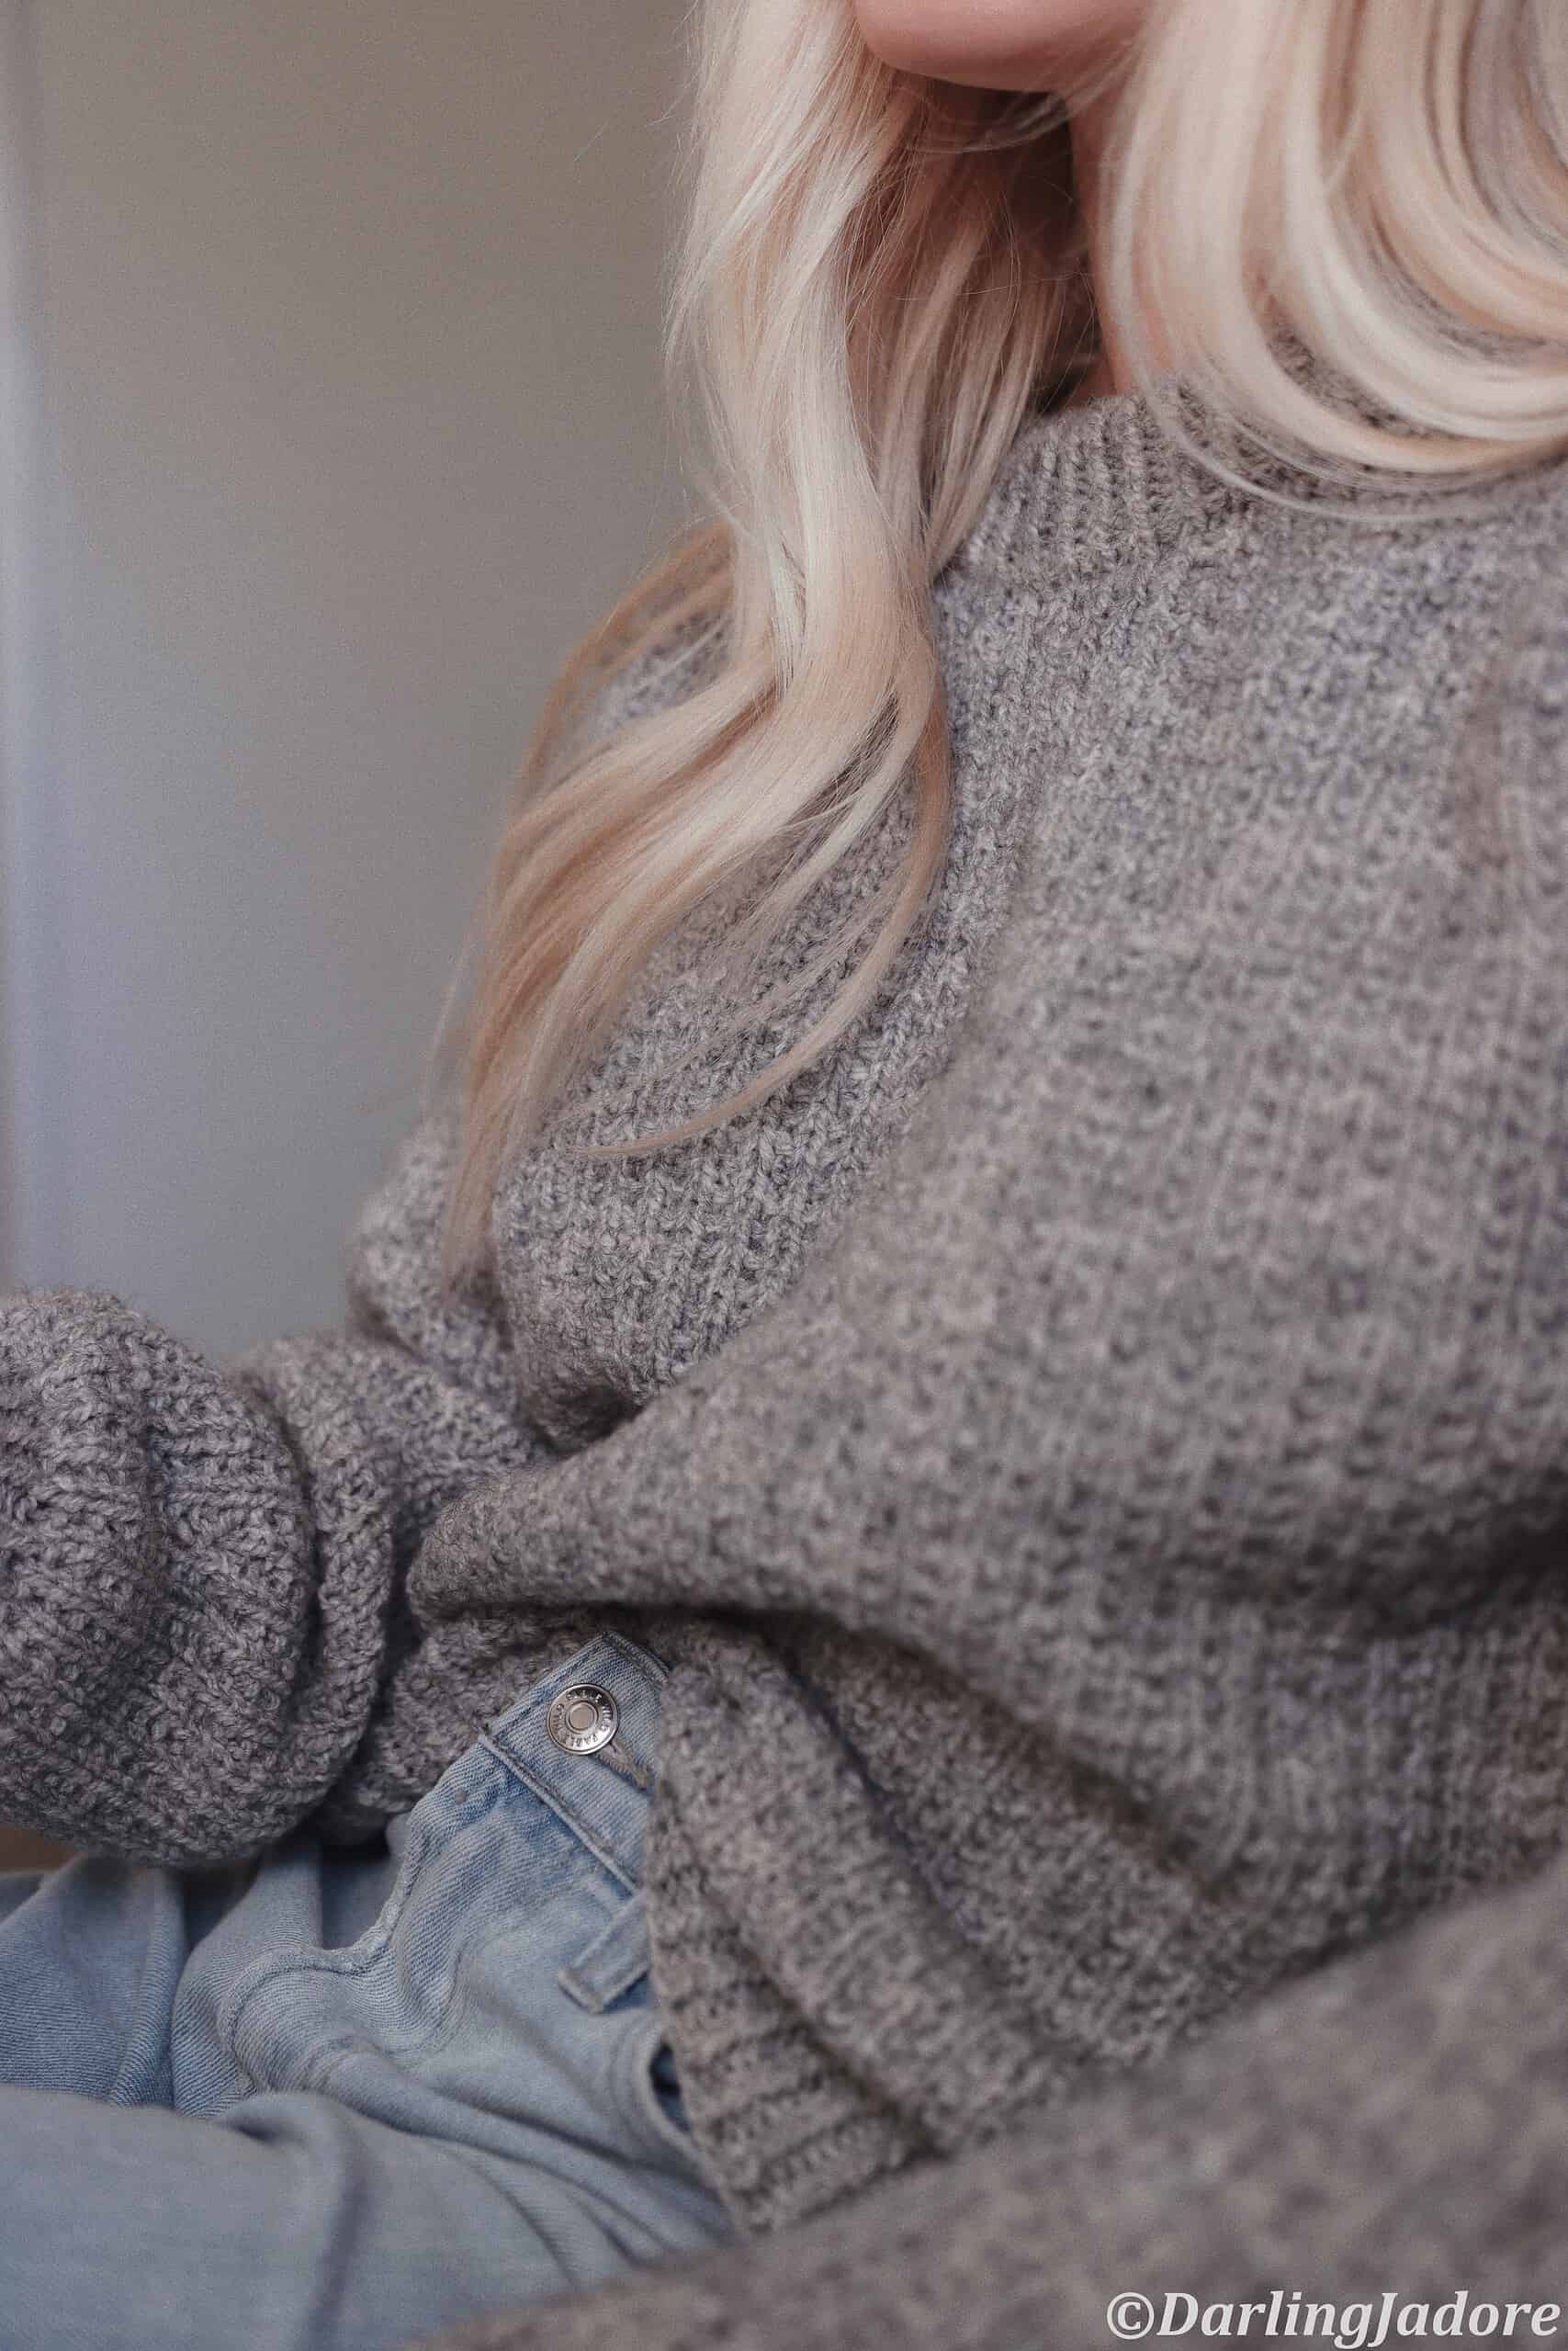 Textured, Cozy Knit Sweater Patterm: Hawthorn Sweater, Darling Jadore